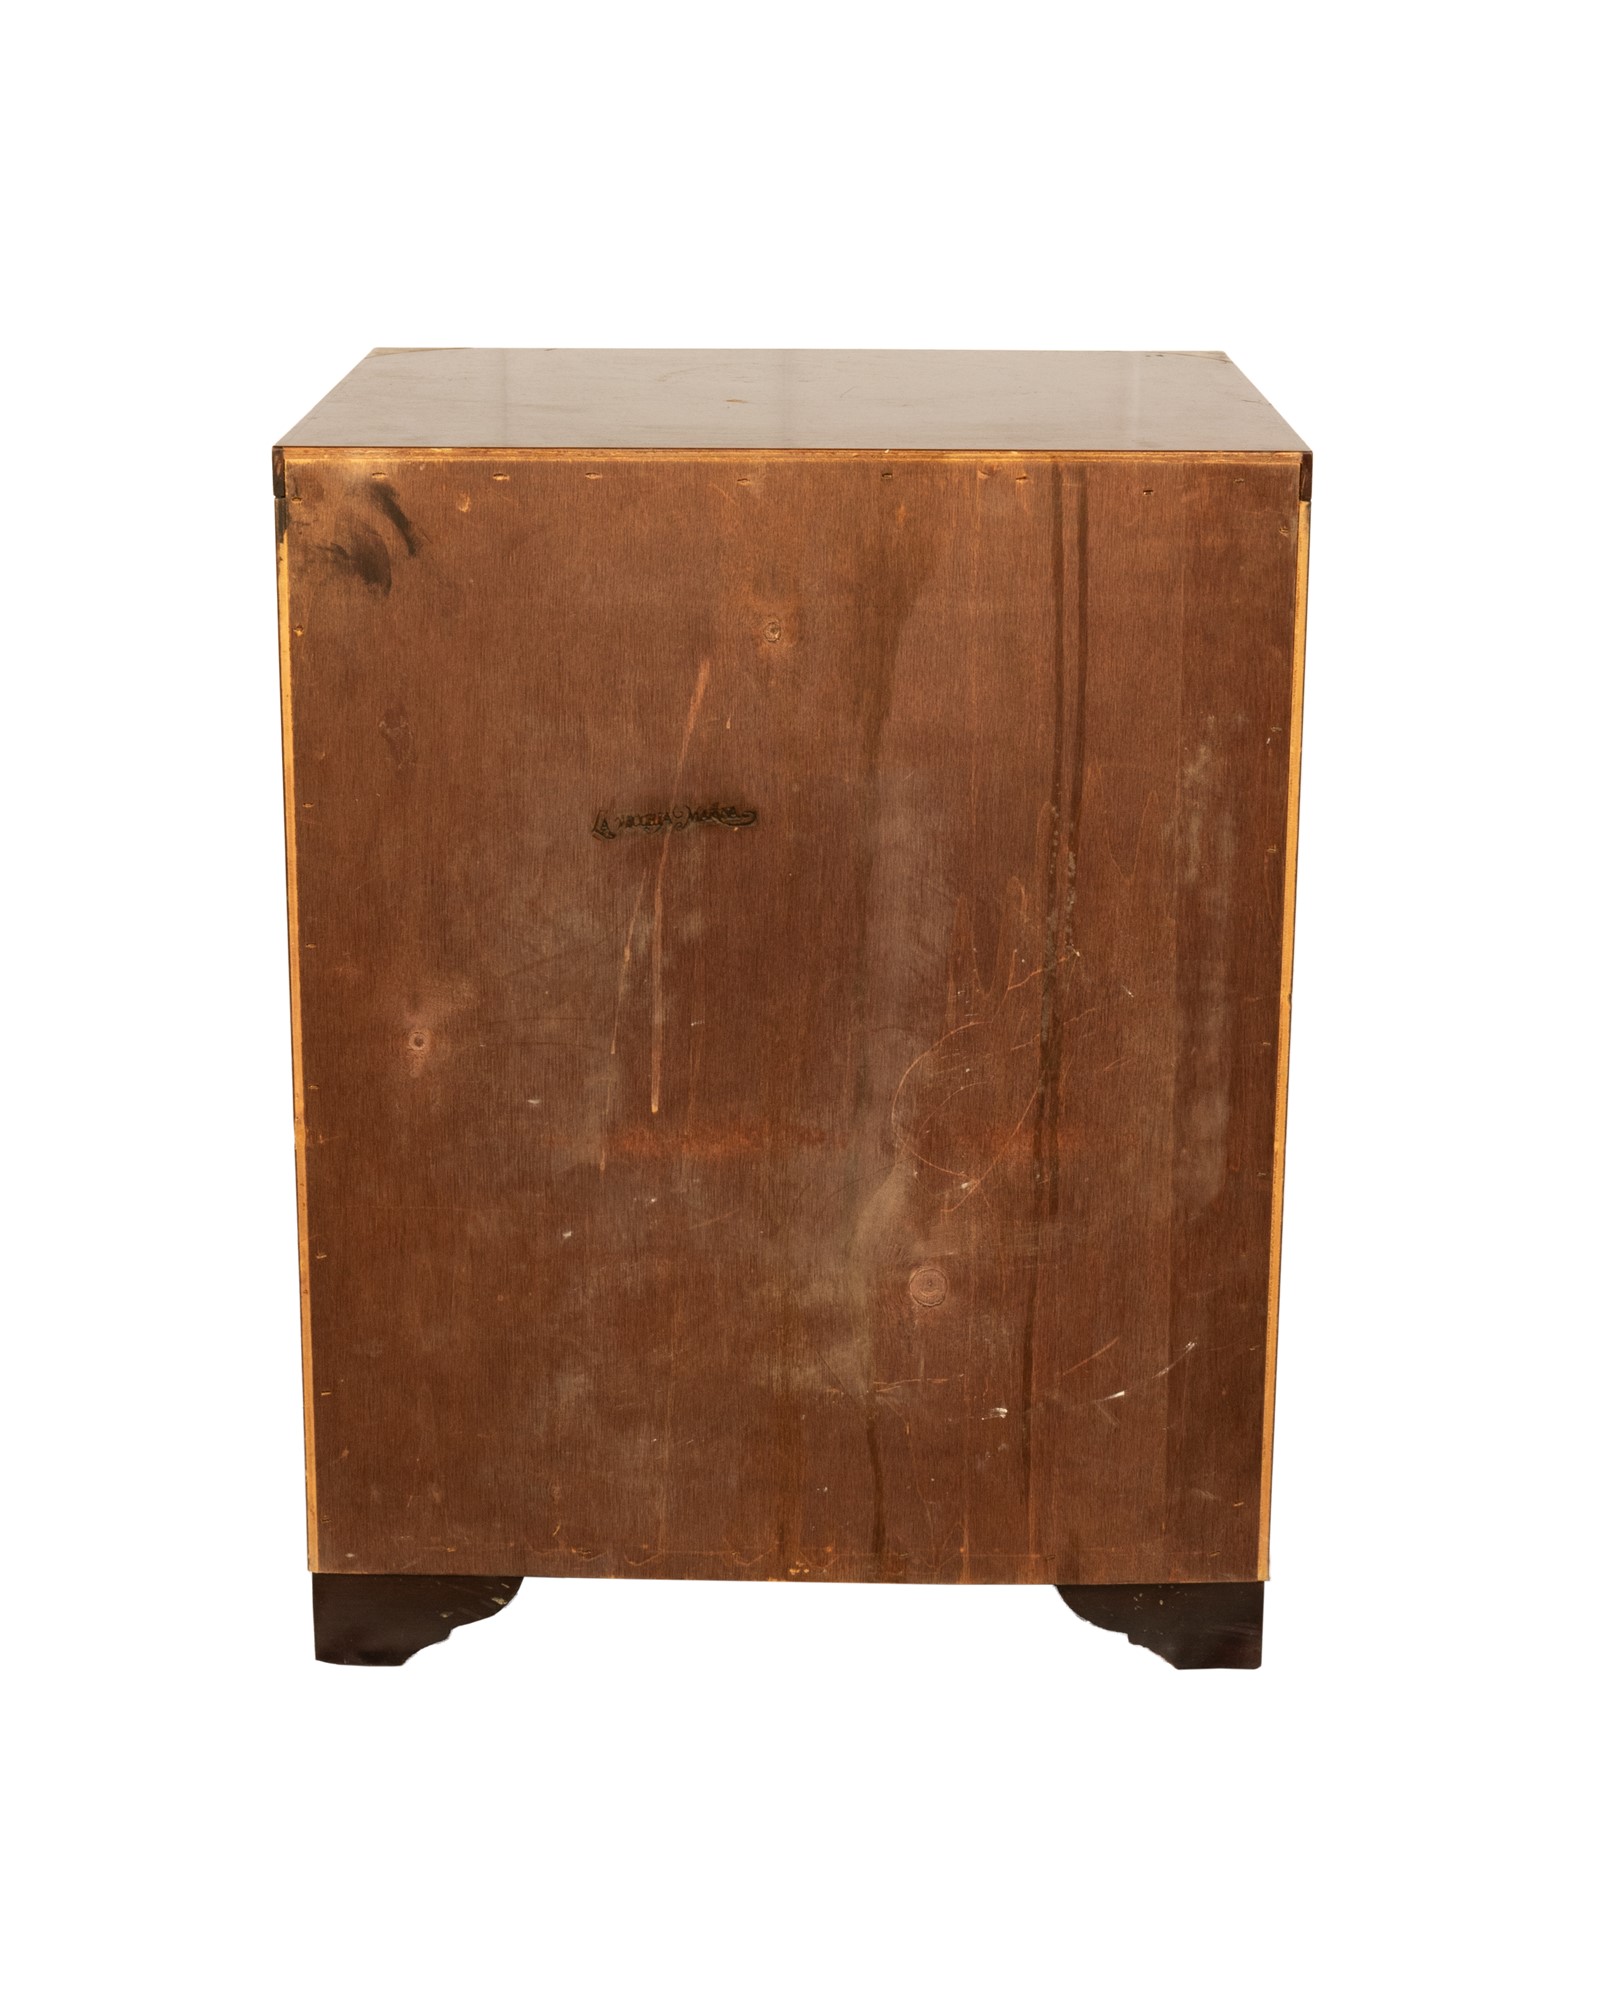 Antica Marina wooden bedside table with brass inserts - Image 23 of 23